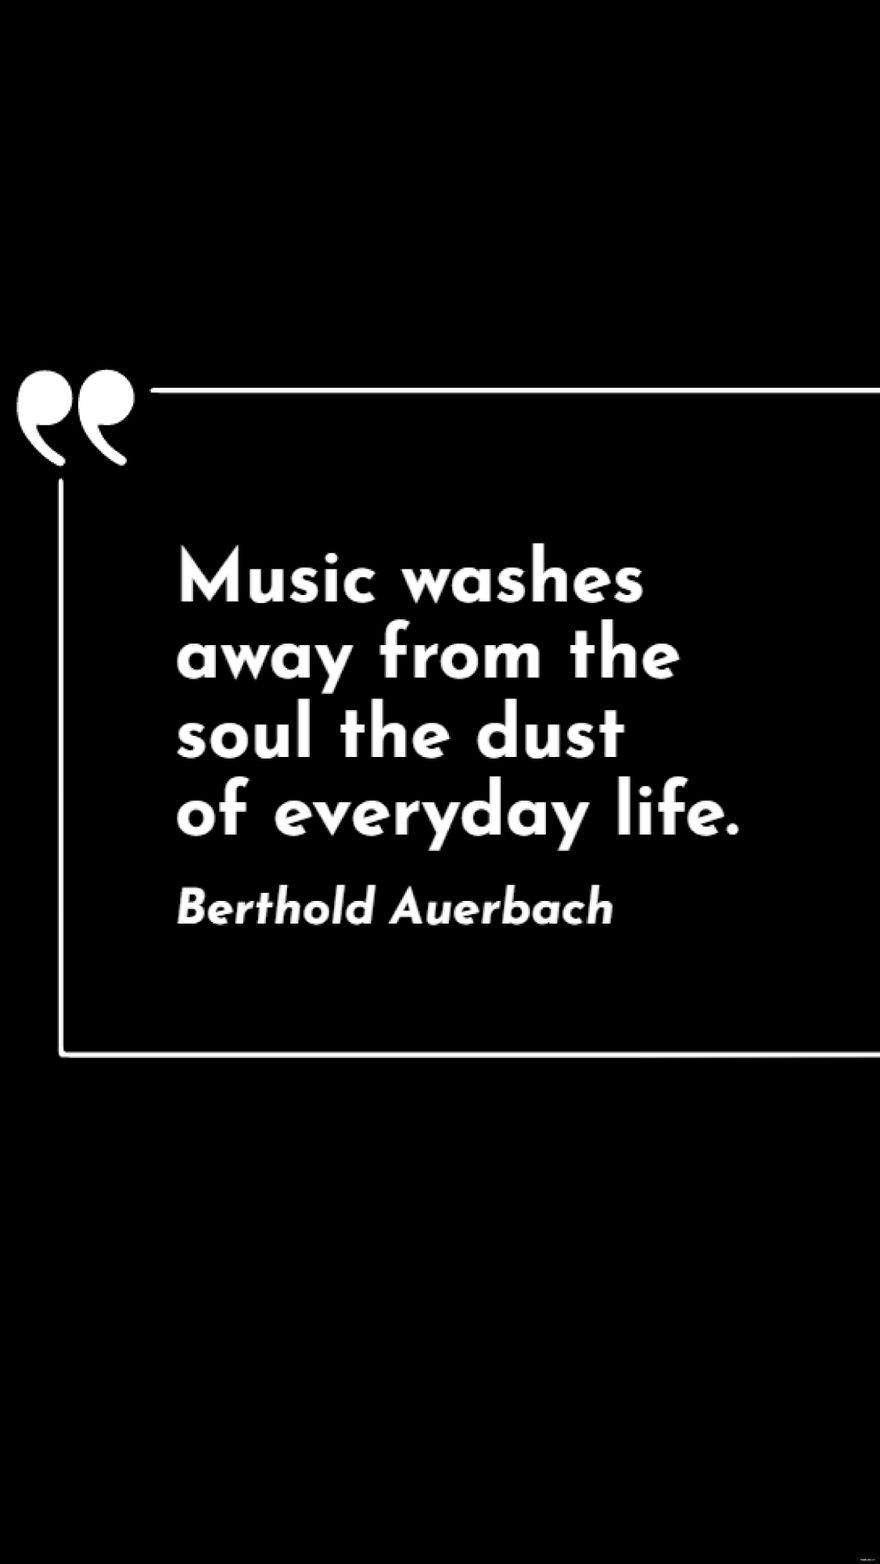 Berthold Auerbach - Music washes away from the soul the dust of everyday life.